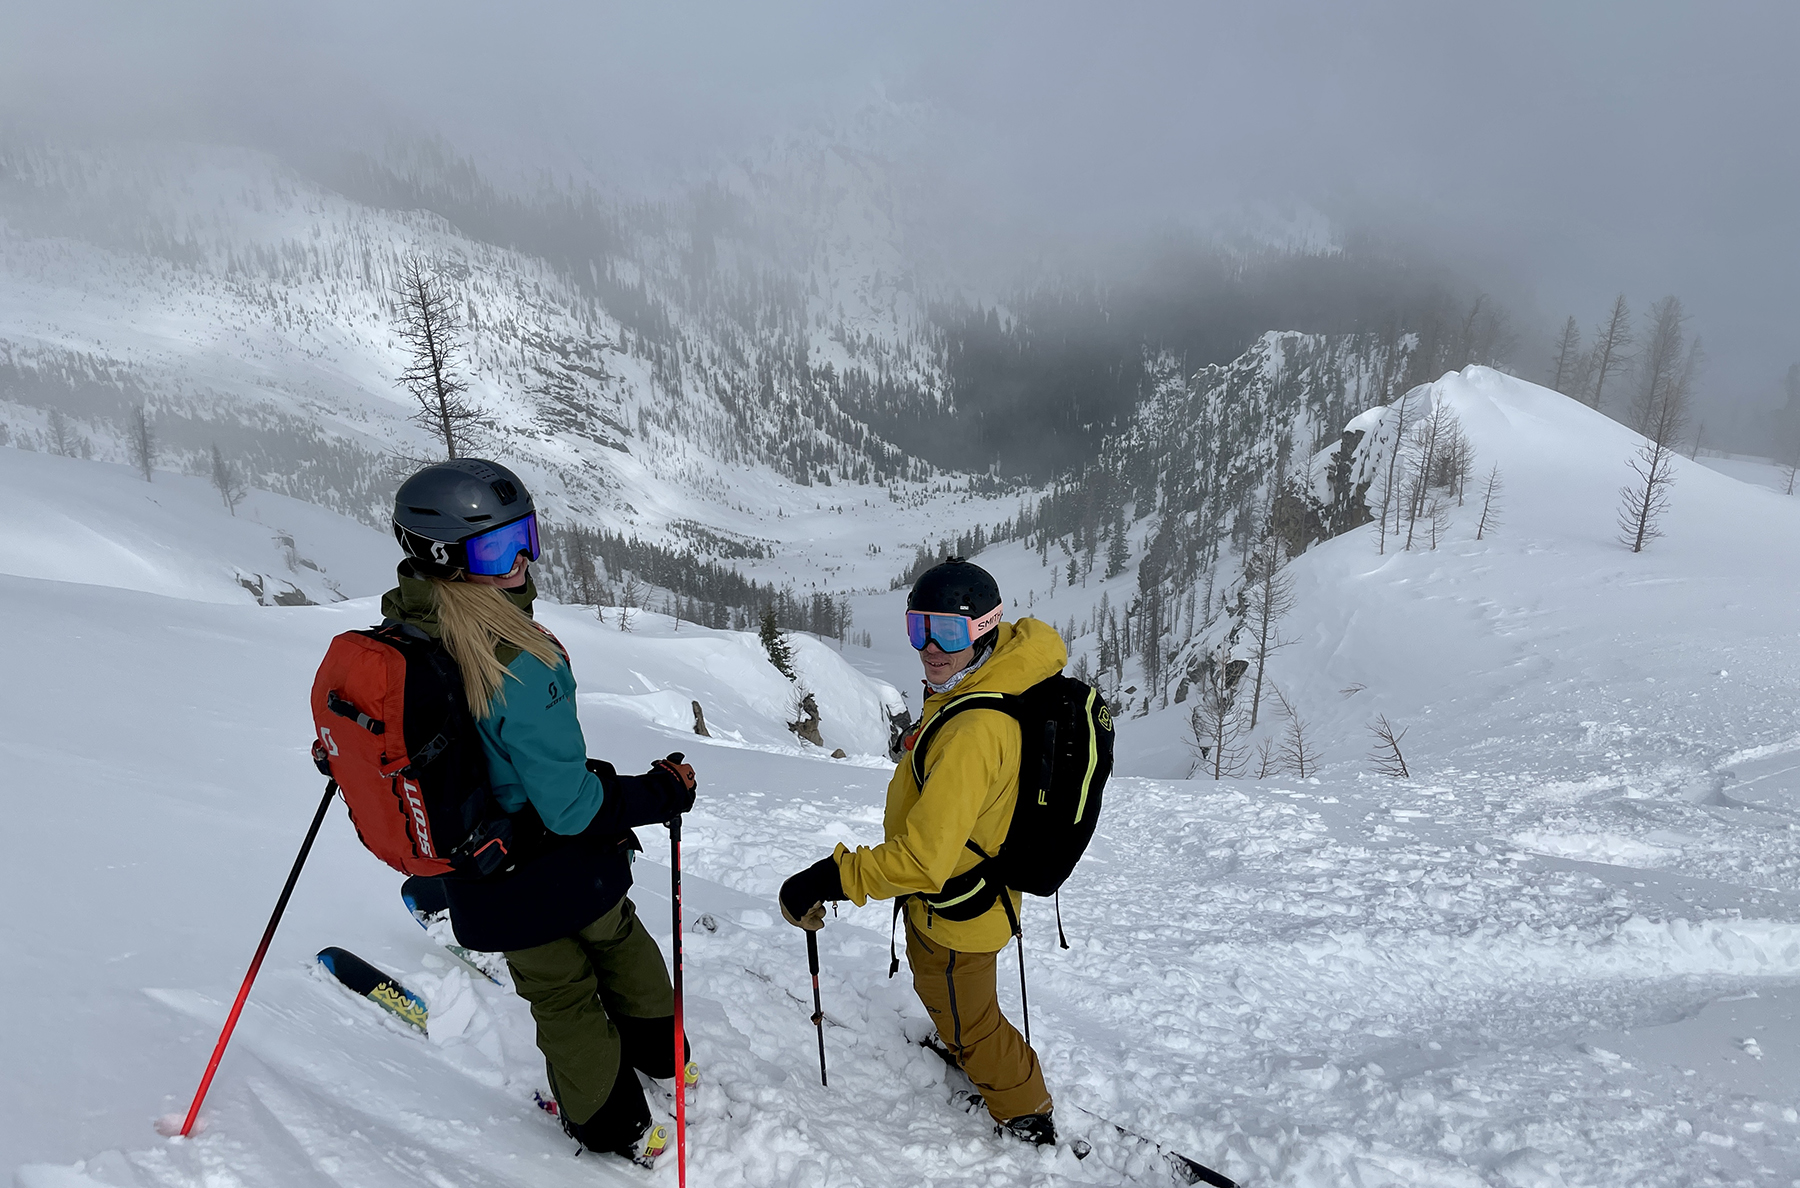 McKenna Peterson & Jed Yeiser testing product in the Cascades.